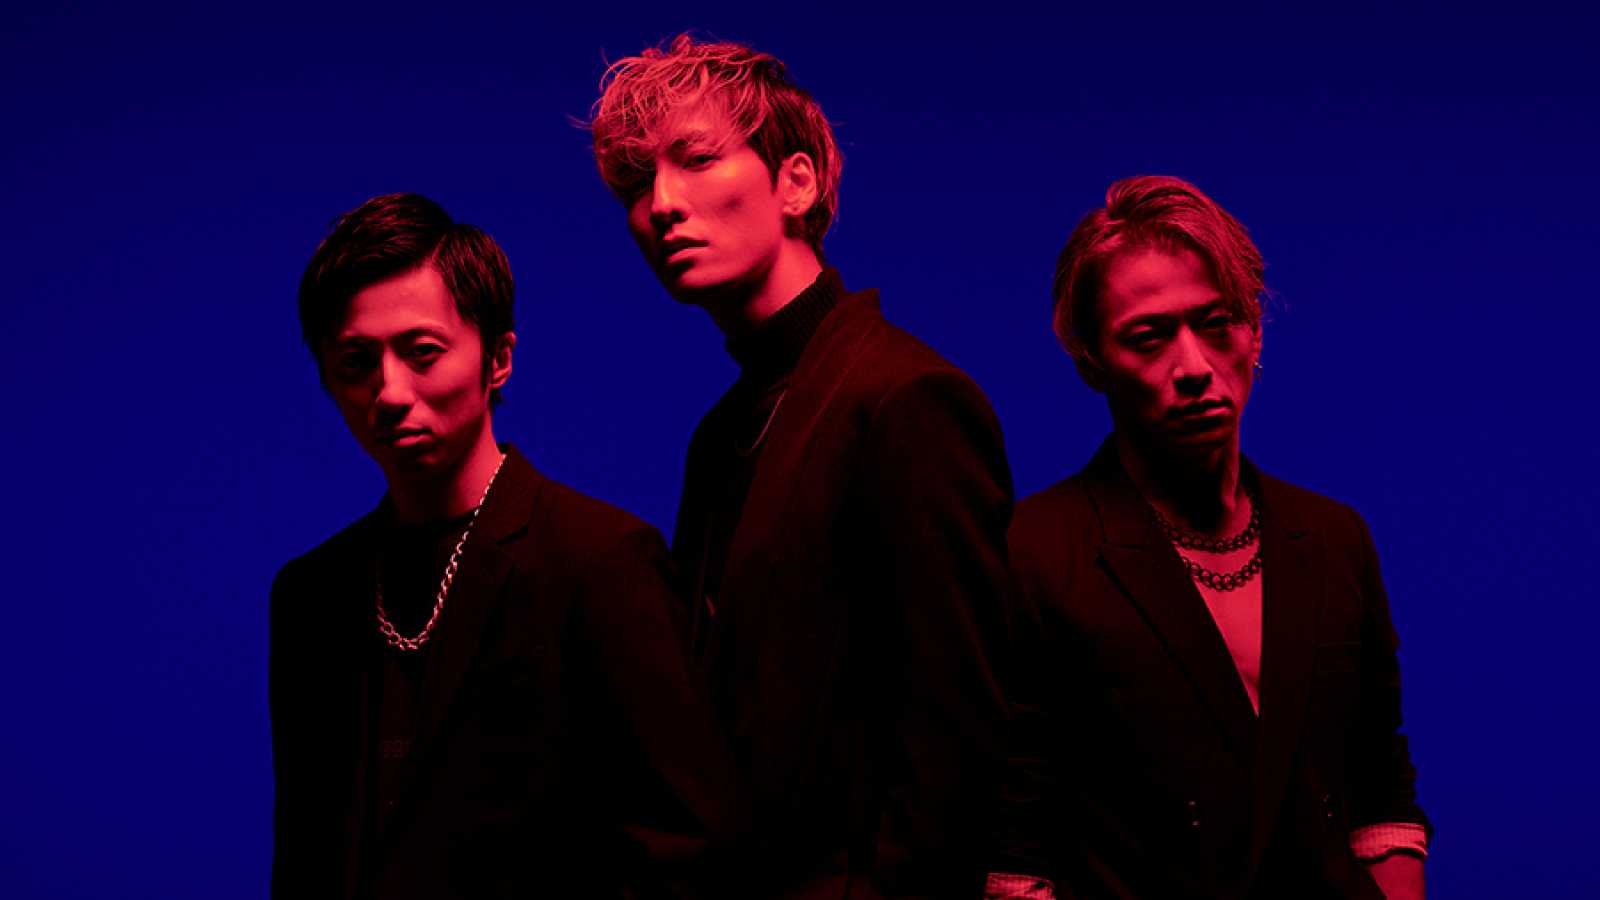 Ryuichi Ogata Leaves w-inds. © PONY CANYON. All rights reserved.